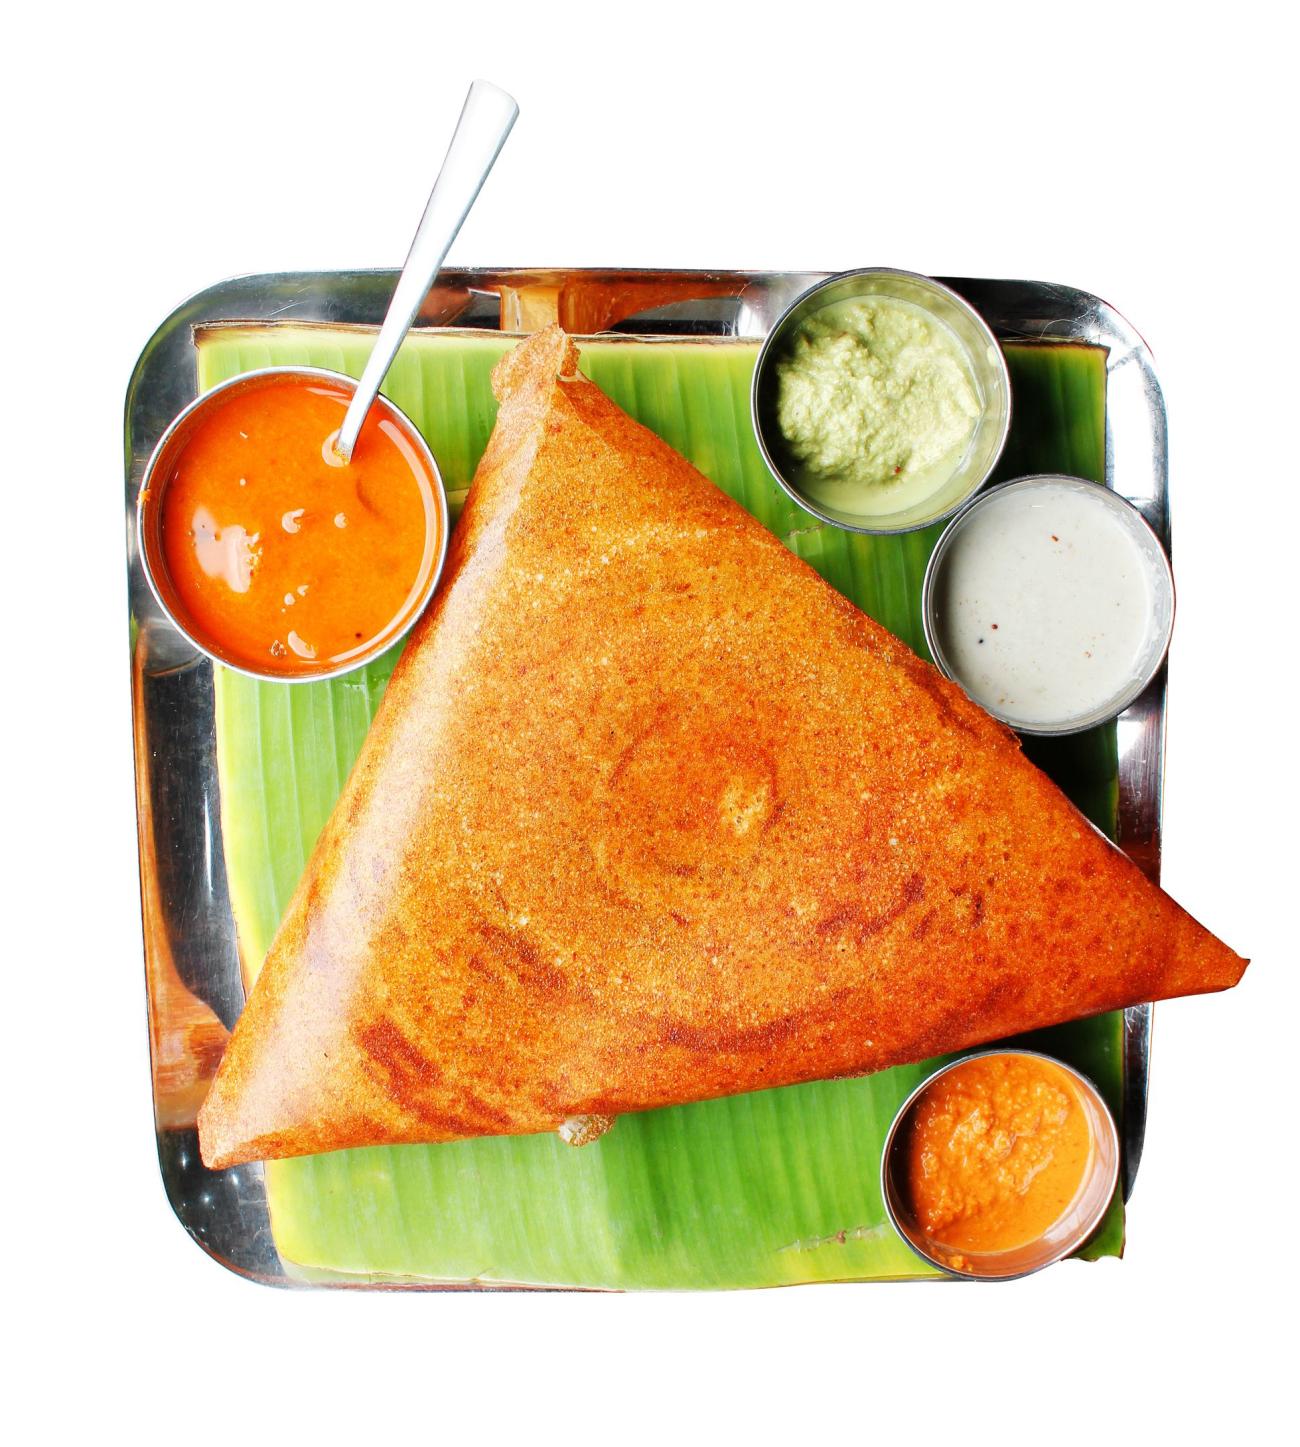 Popular south indian breakfast dosa in golden brown color with 3 types of chutney and sambar